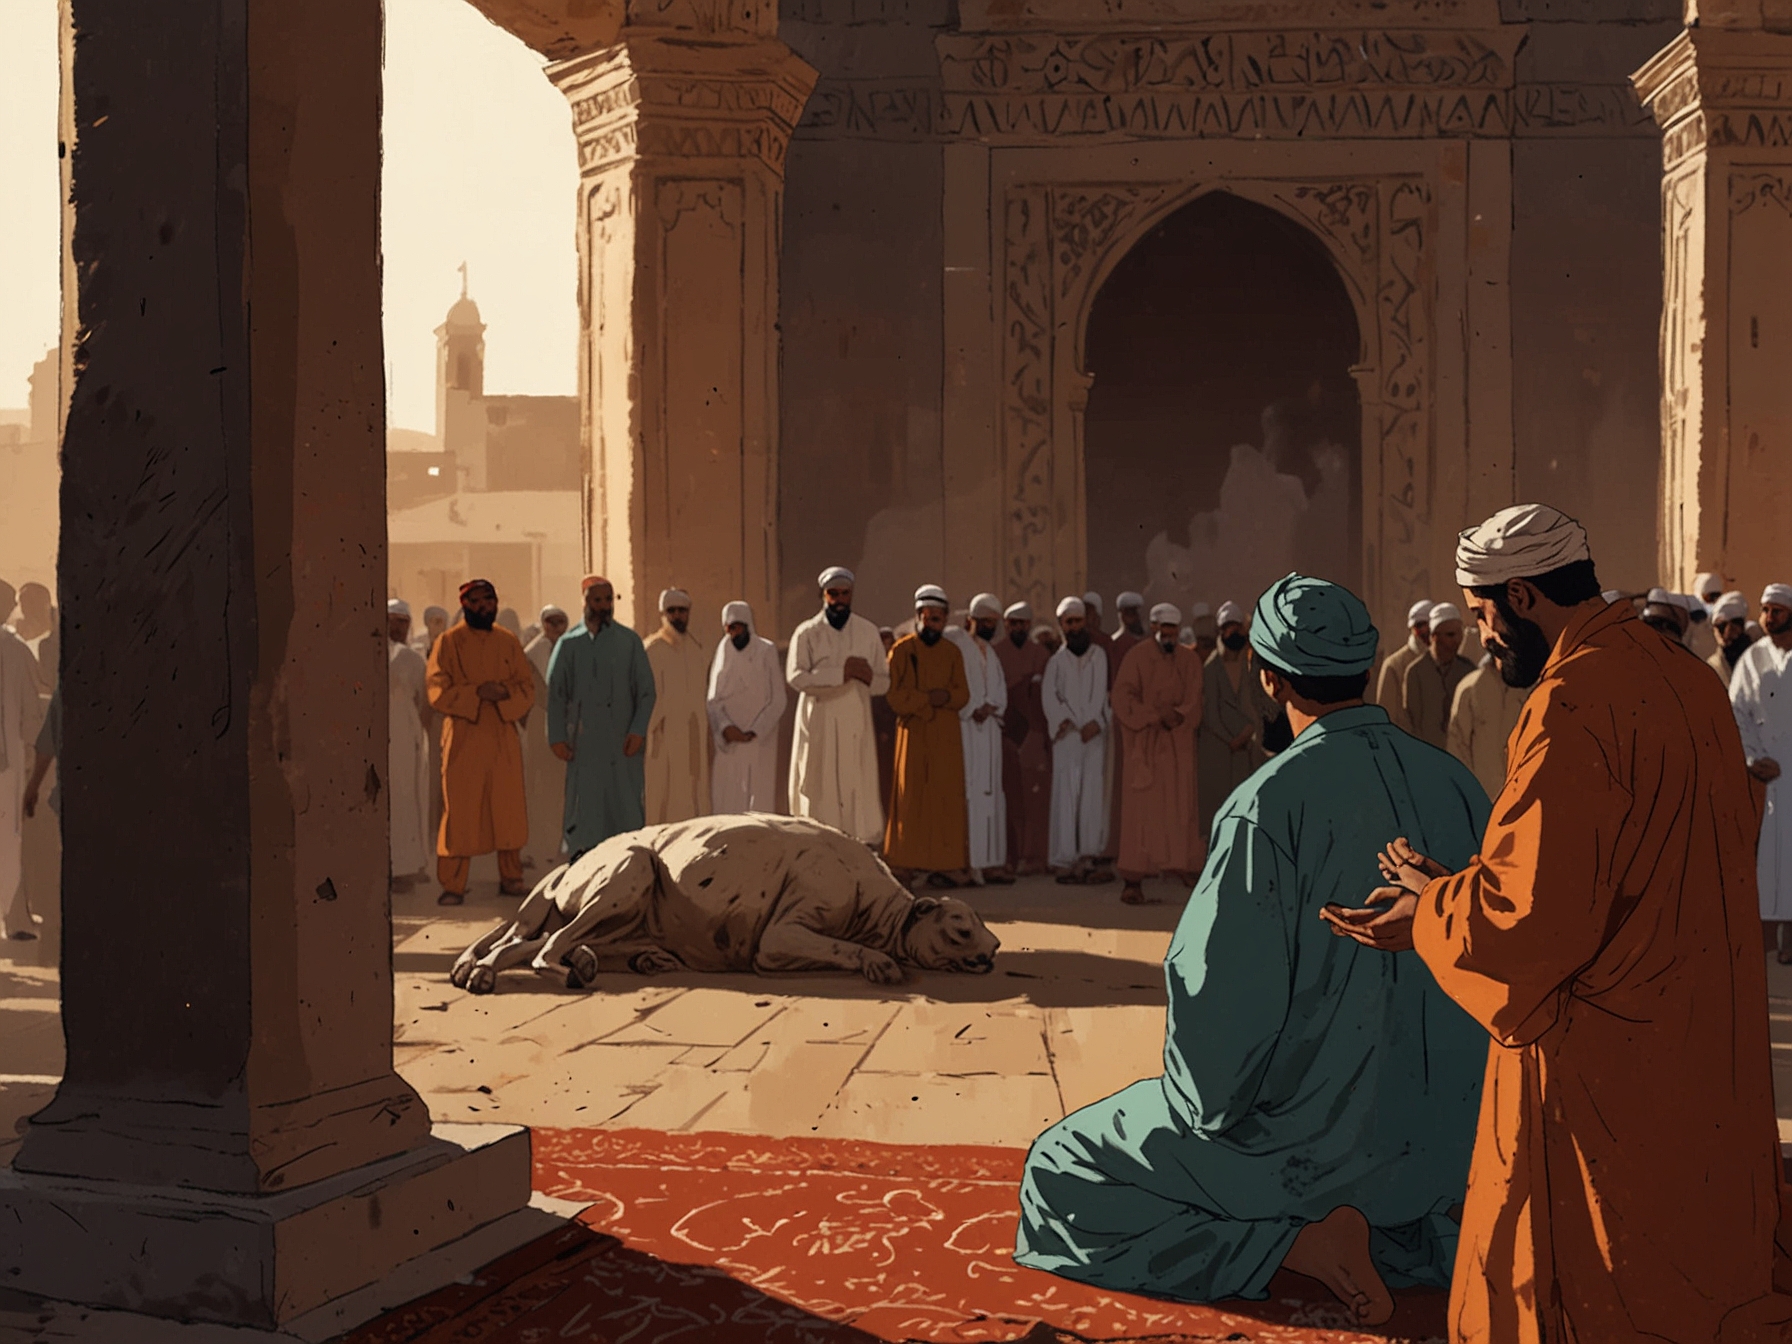 The act of animal sacrifice being performed as part of Eid ul Adha, honoring the story of Abraham's willingness to sacrifice his son in obedience to God.